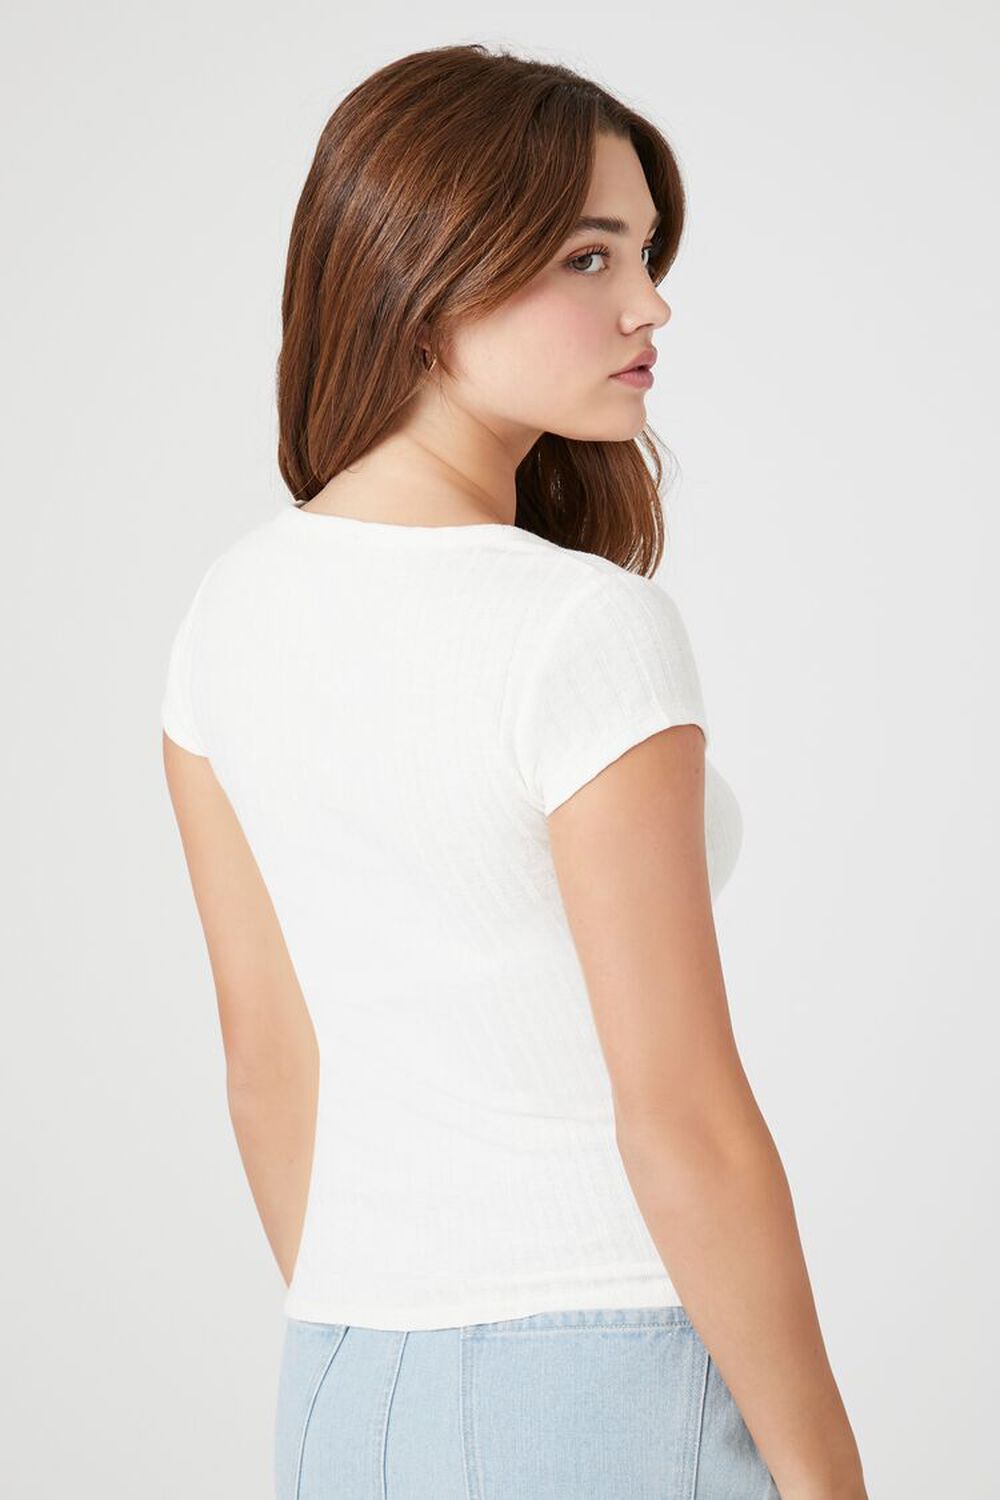 WHITE Rib-Knit Buttoned Baby Tee, image 3